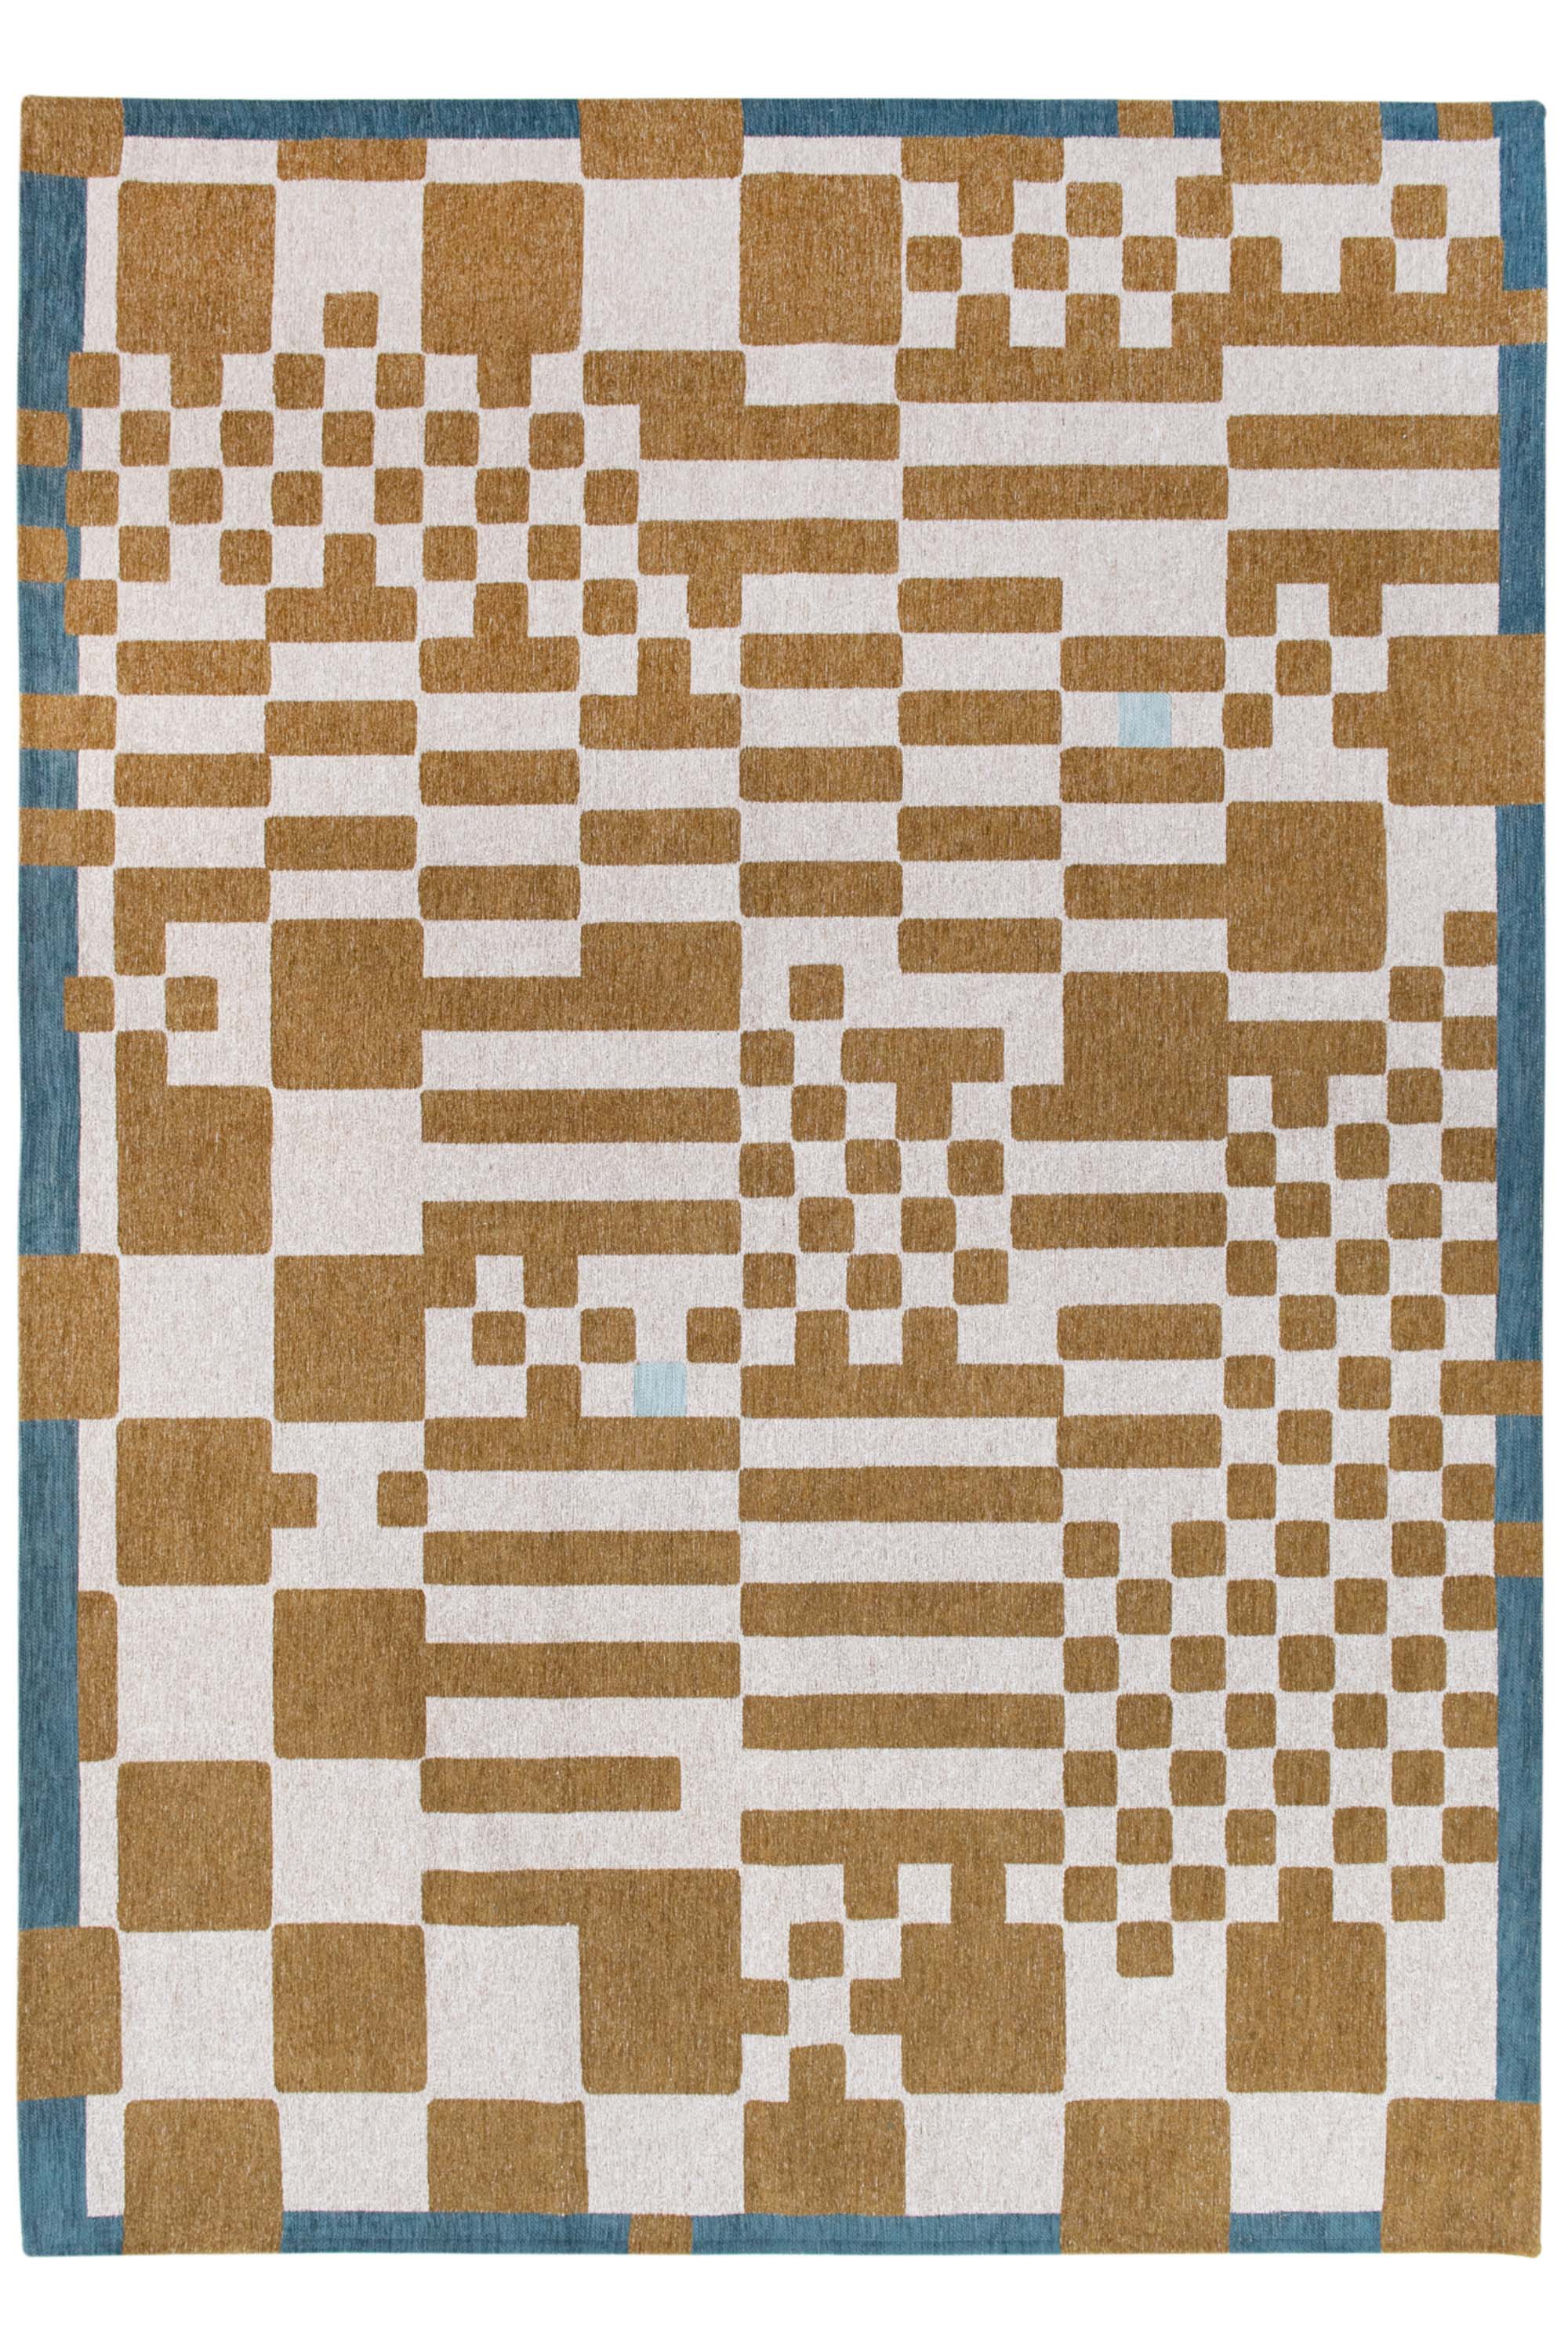 Abstract geometric rug with yellow, green, and white tones